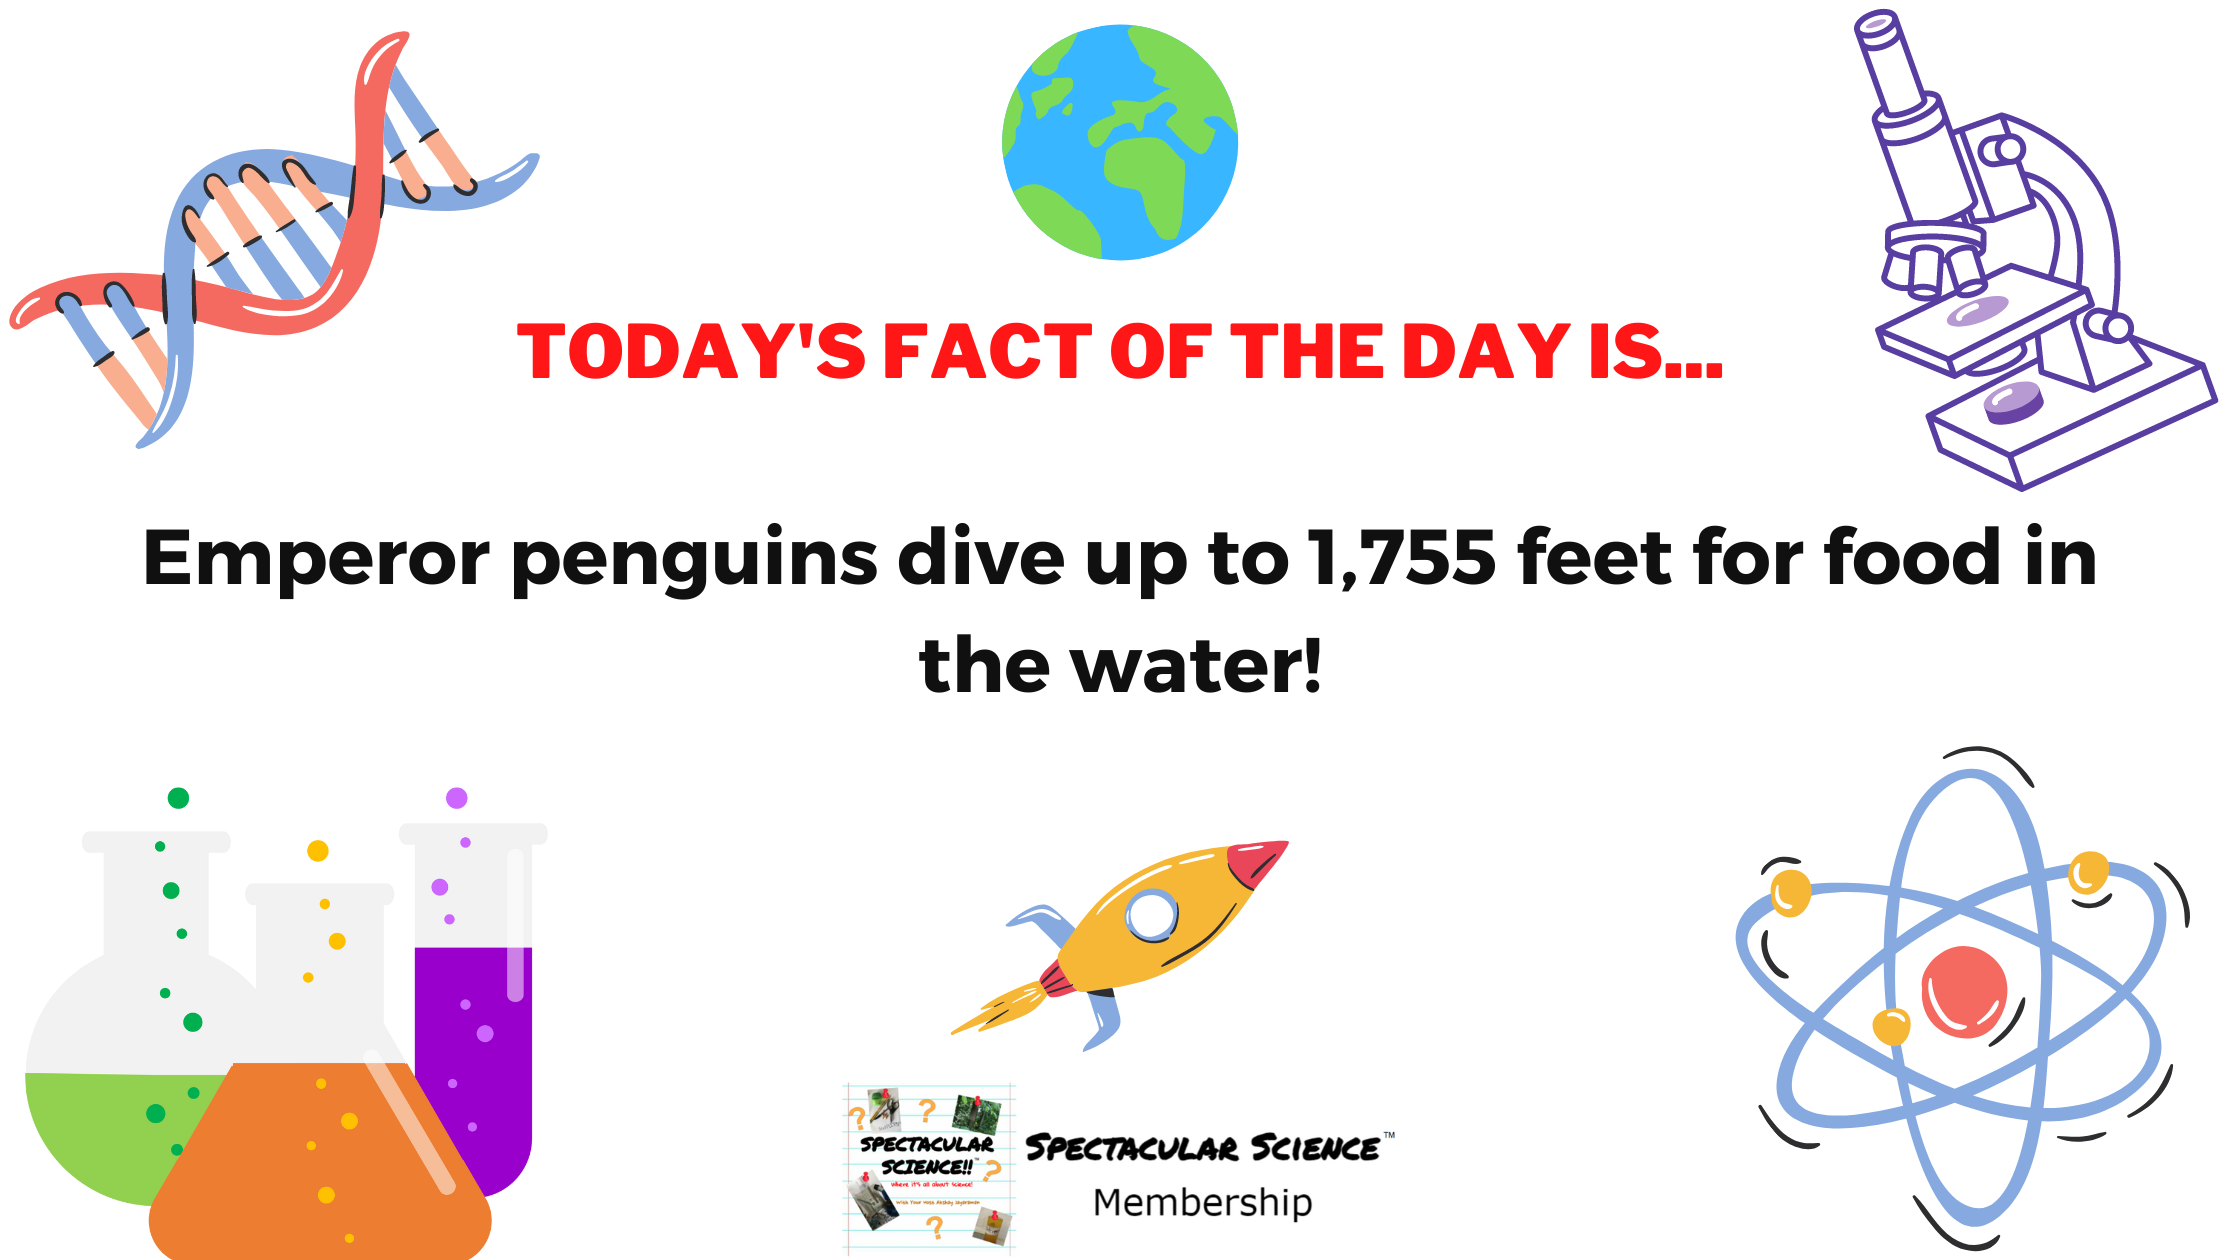 Fact of the Day Image August 5th